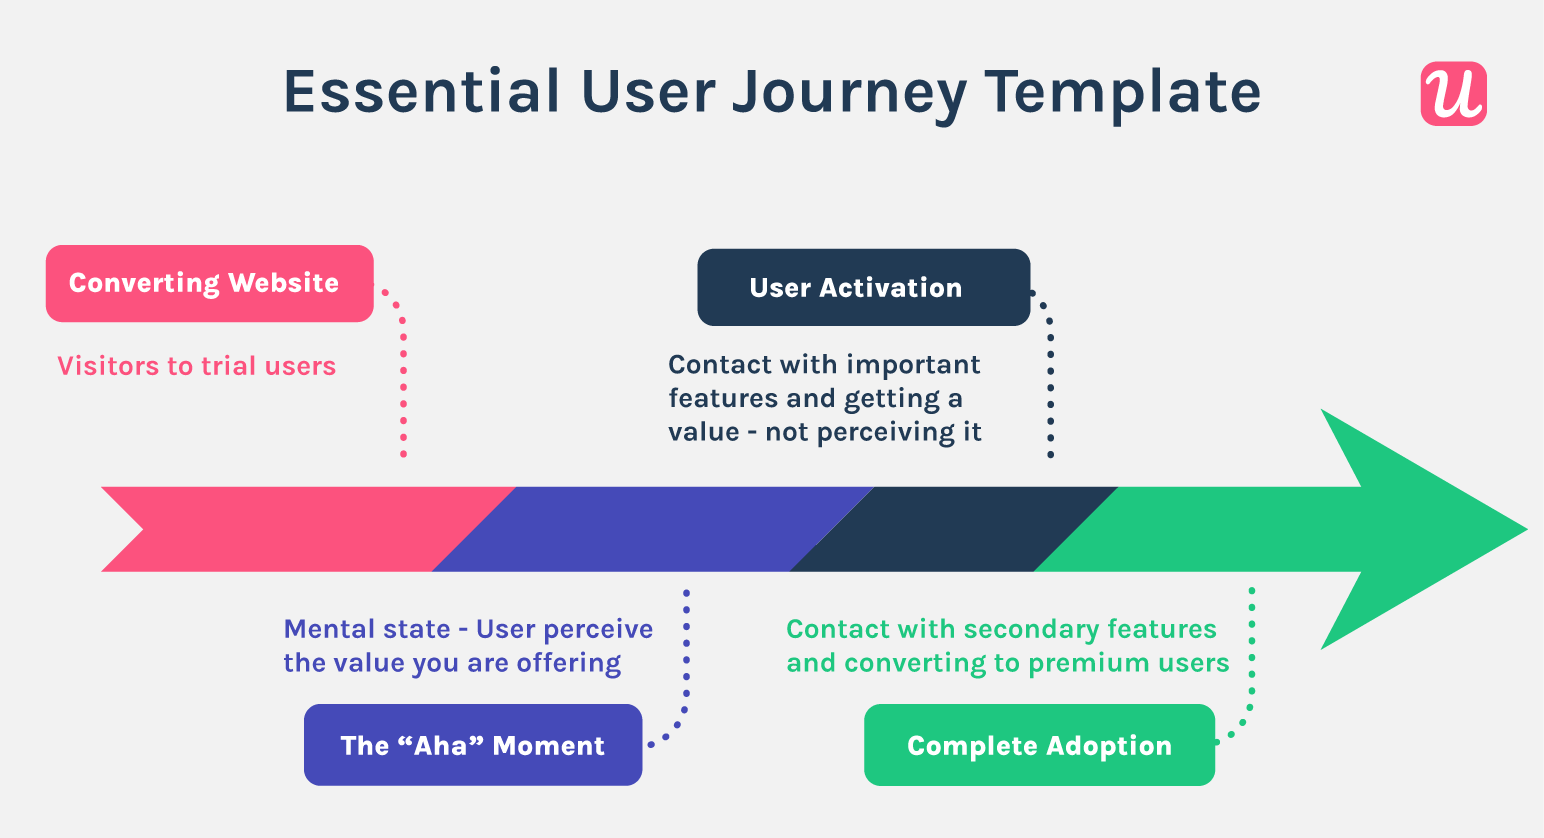 Essential user journey template